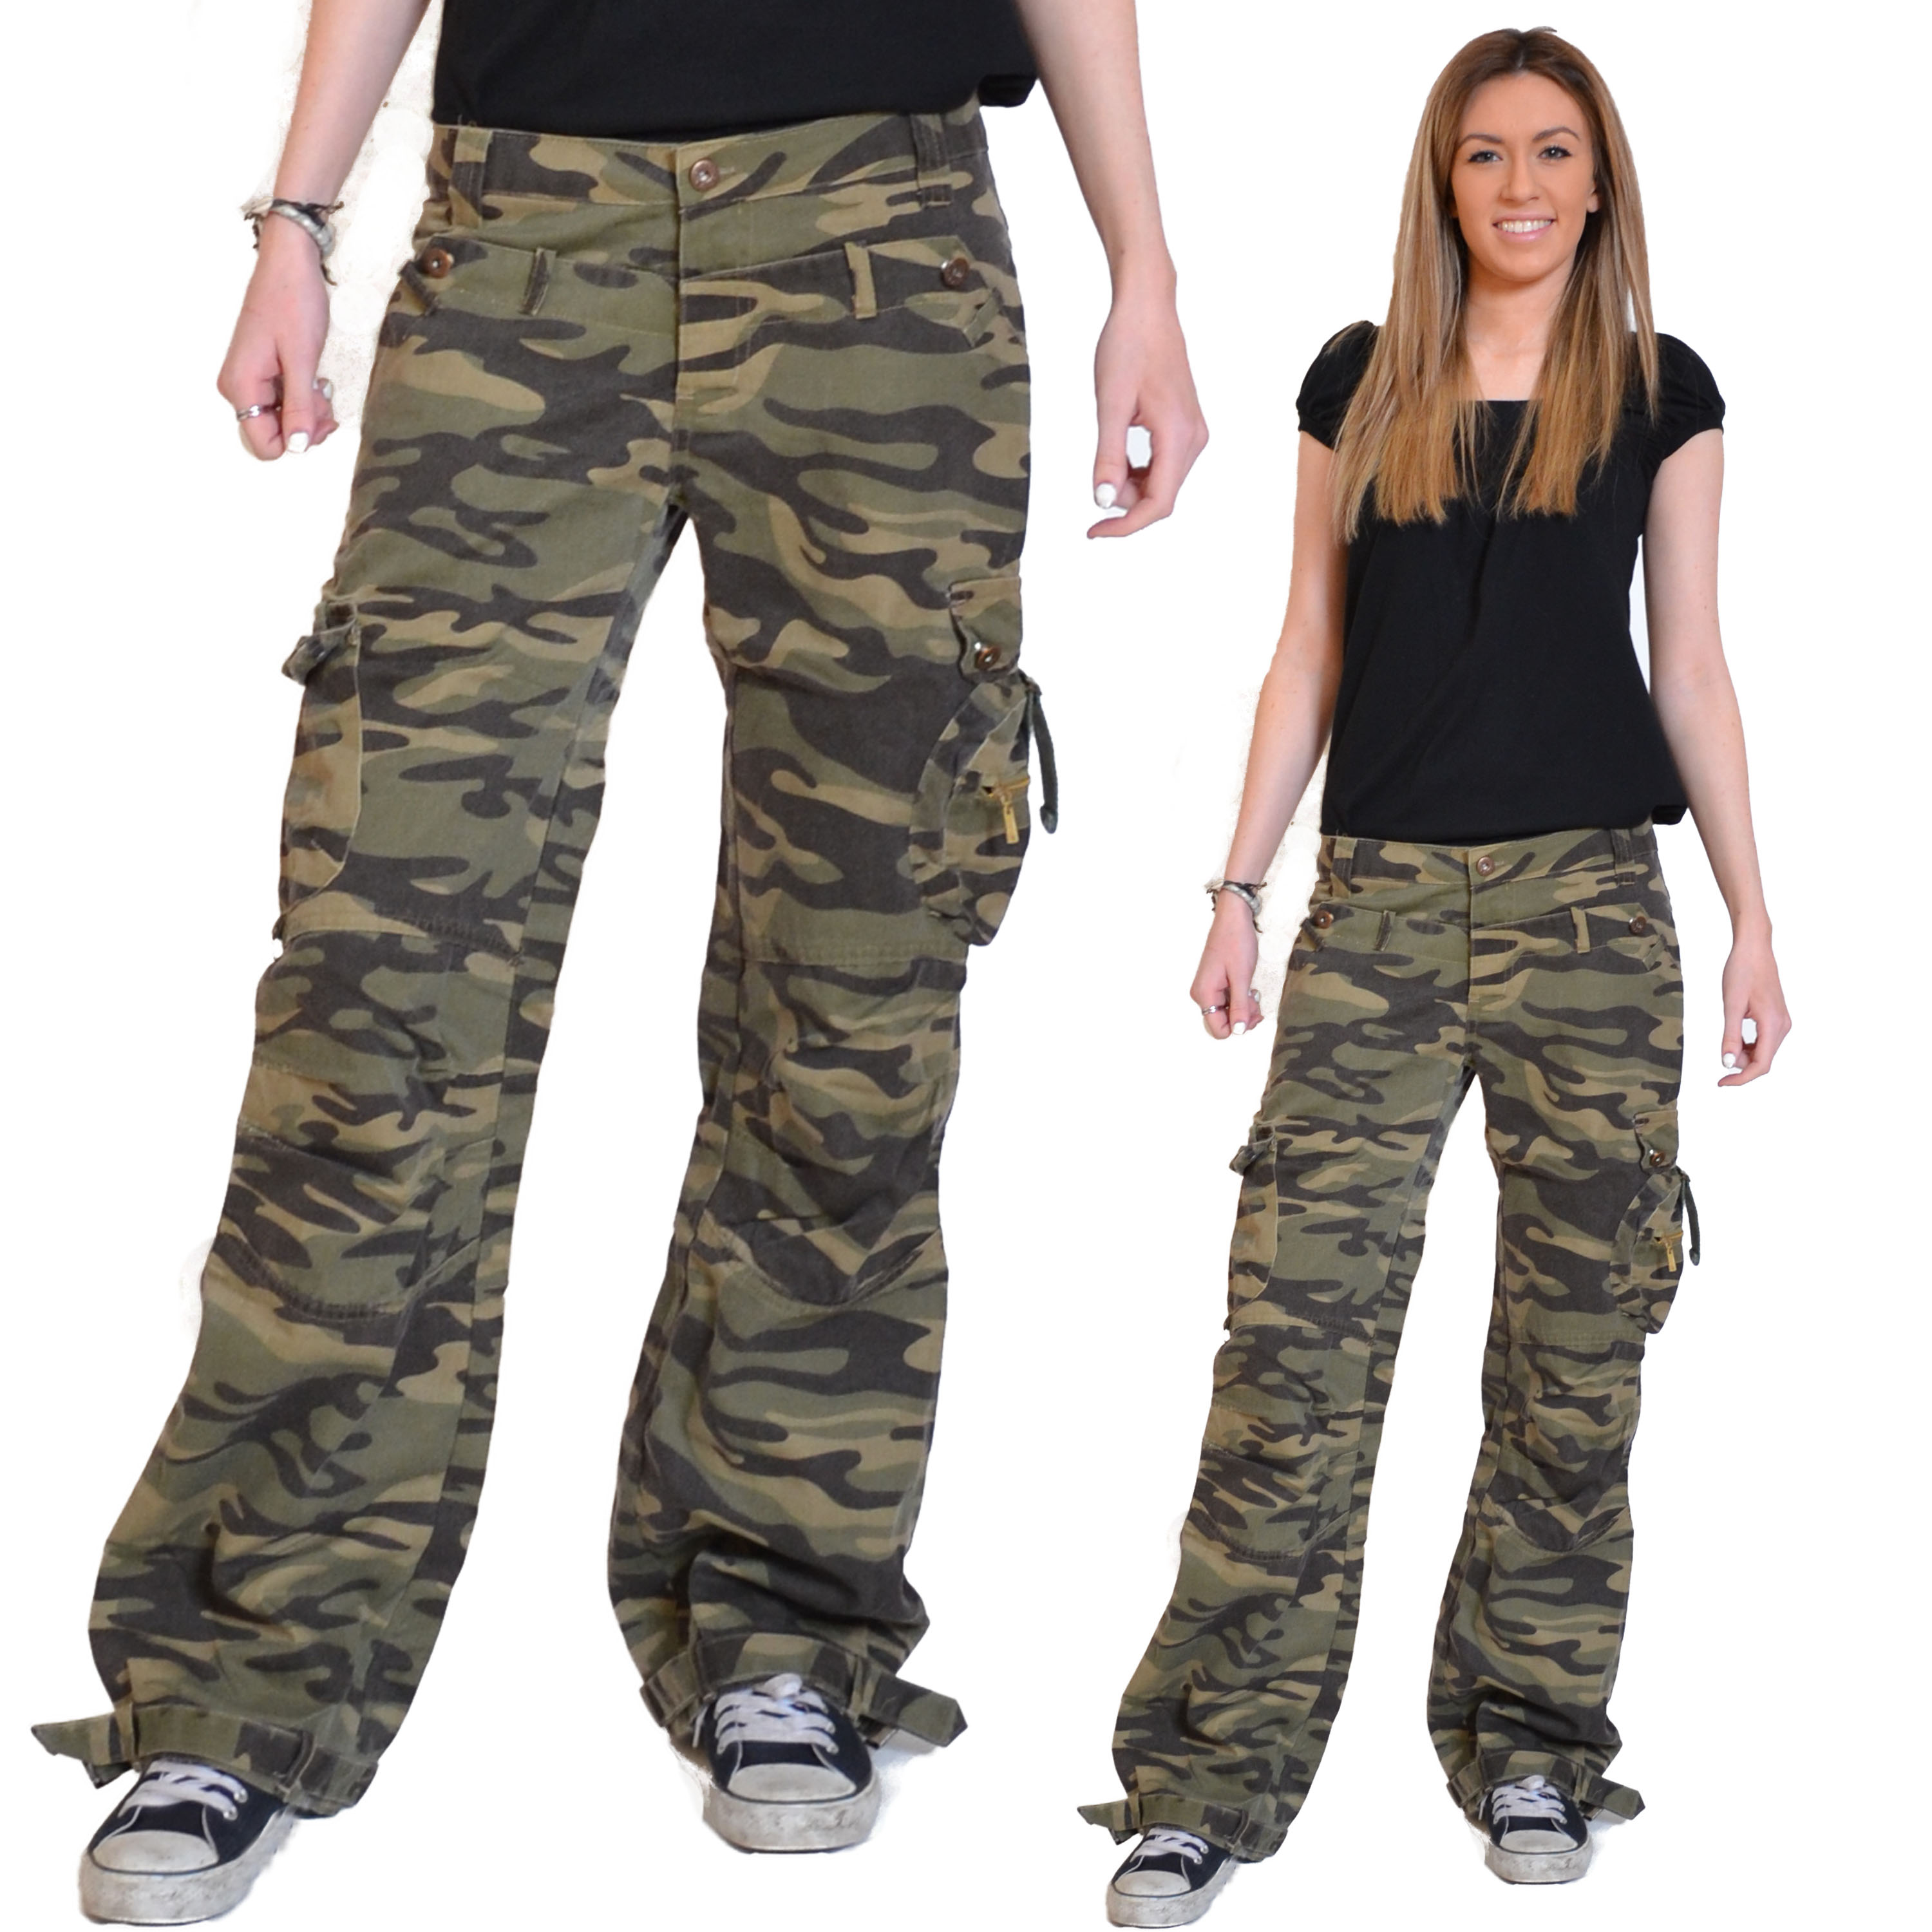 New Womens Army Green Military Camouflage Cargo Combat Pants Jeans Wide ...